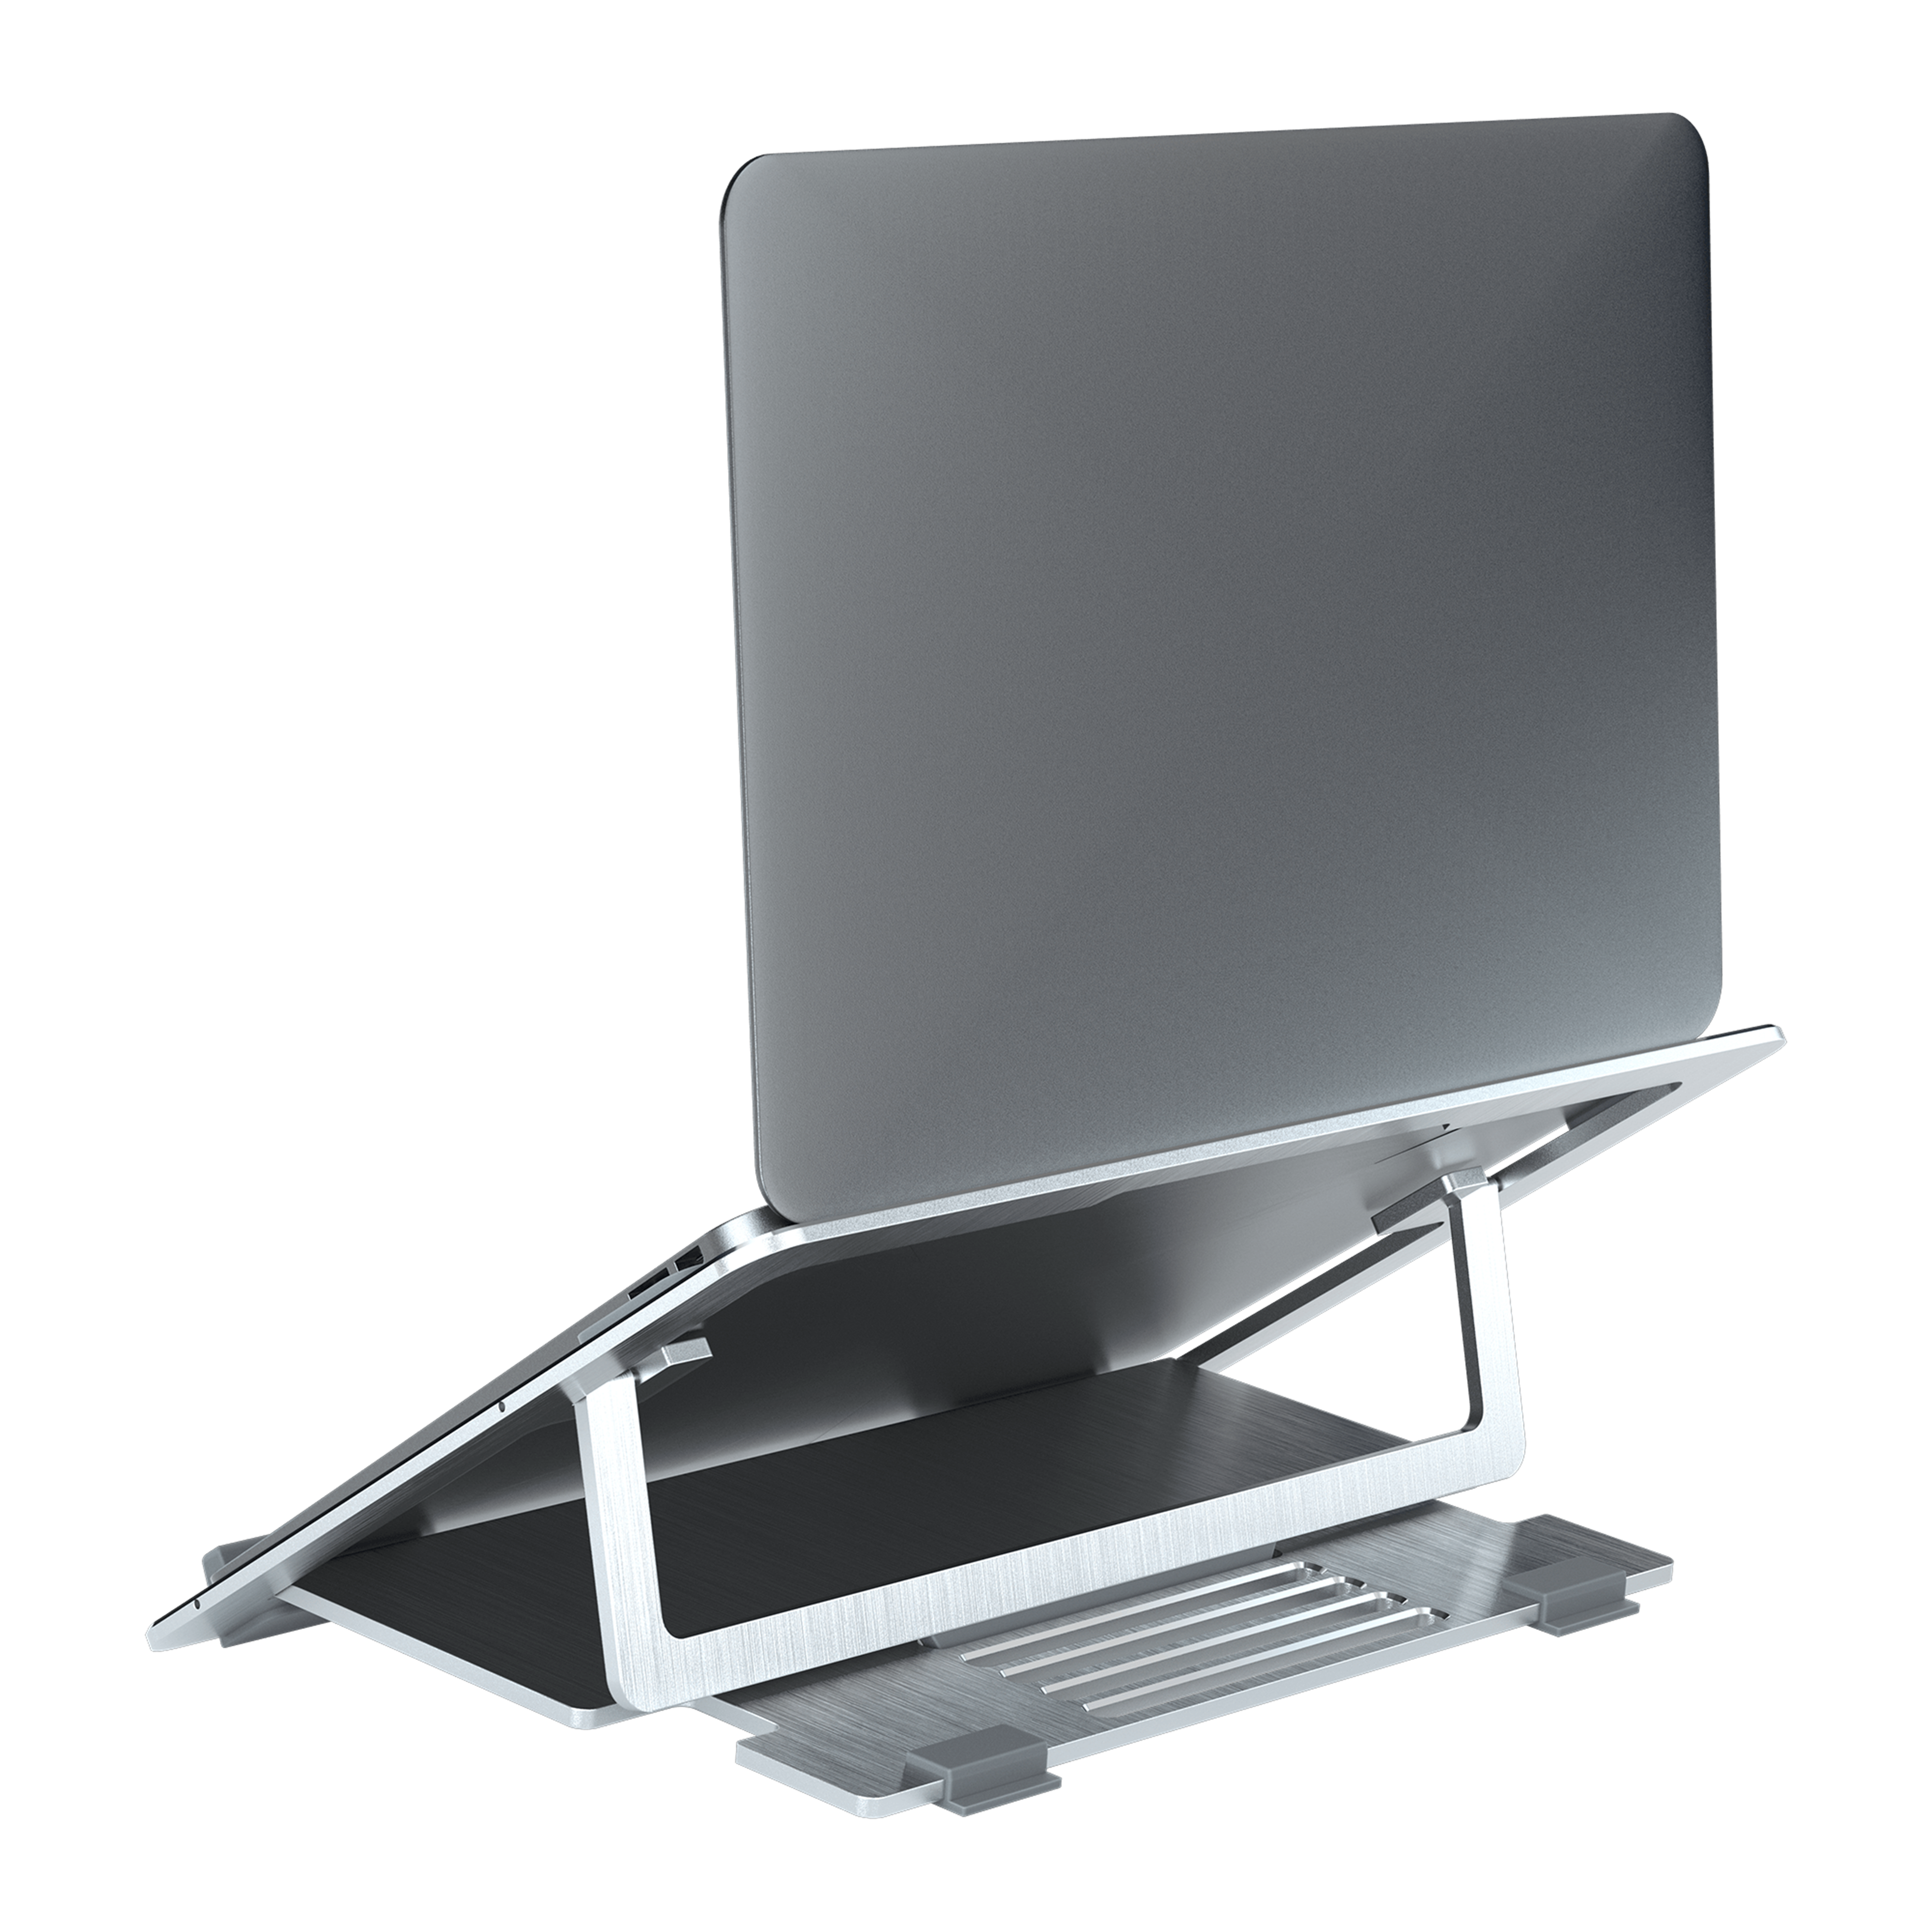 Cooler Master ErgoStand Air Silver | Laptop Cooler and Stand